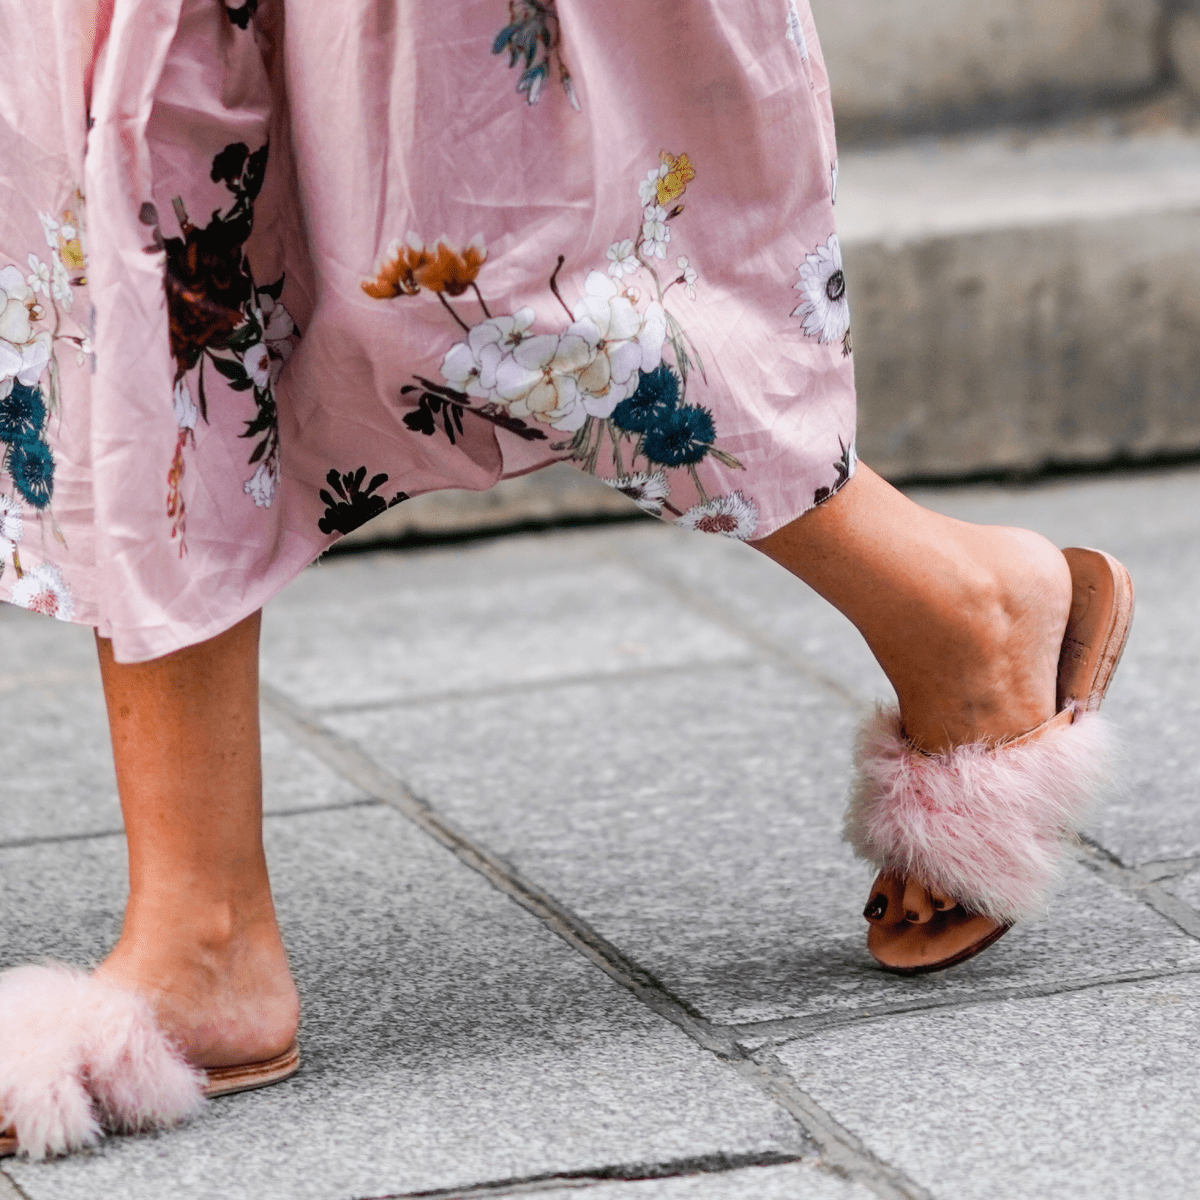 de eerste Vertrouwen op drijvend 19 Stylish Slippers to Make Working From Home Better - Fashionista